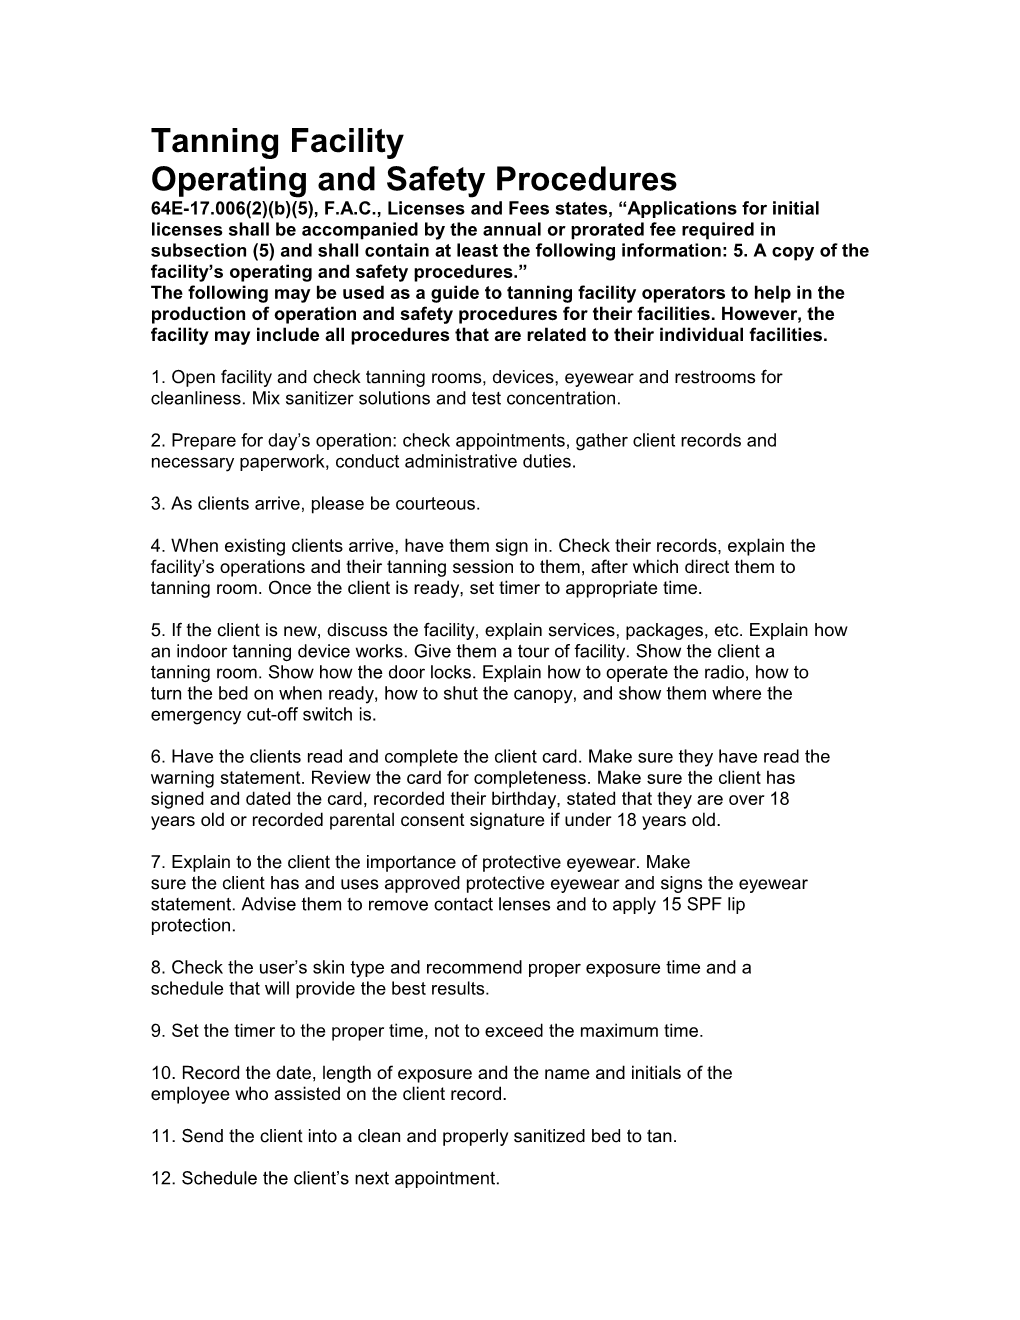 Operating and Safety Procedures